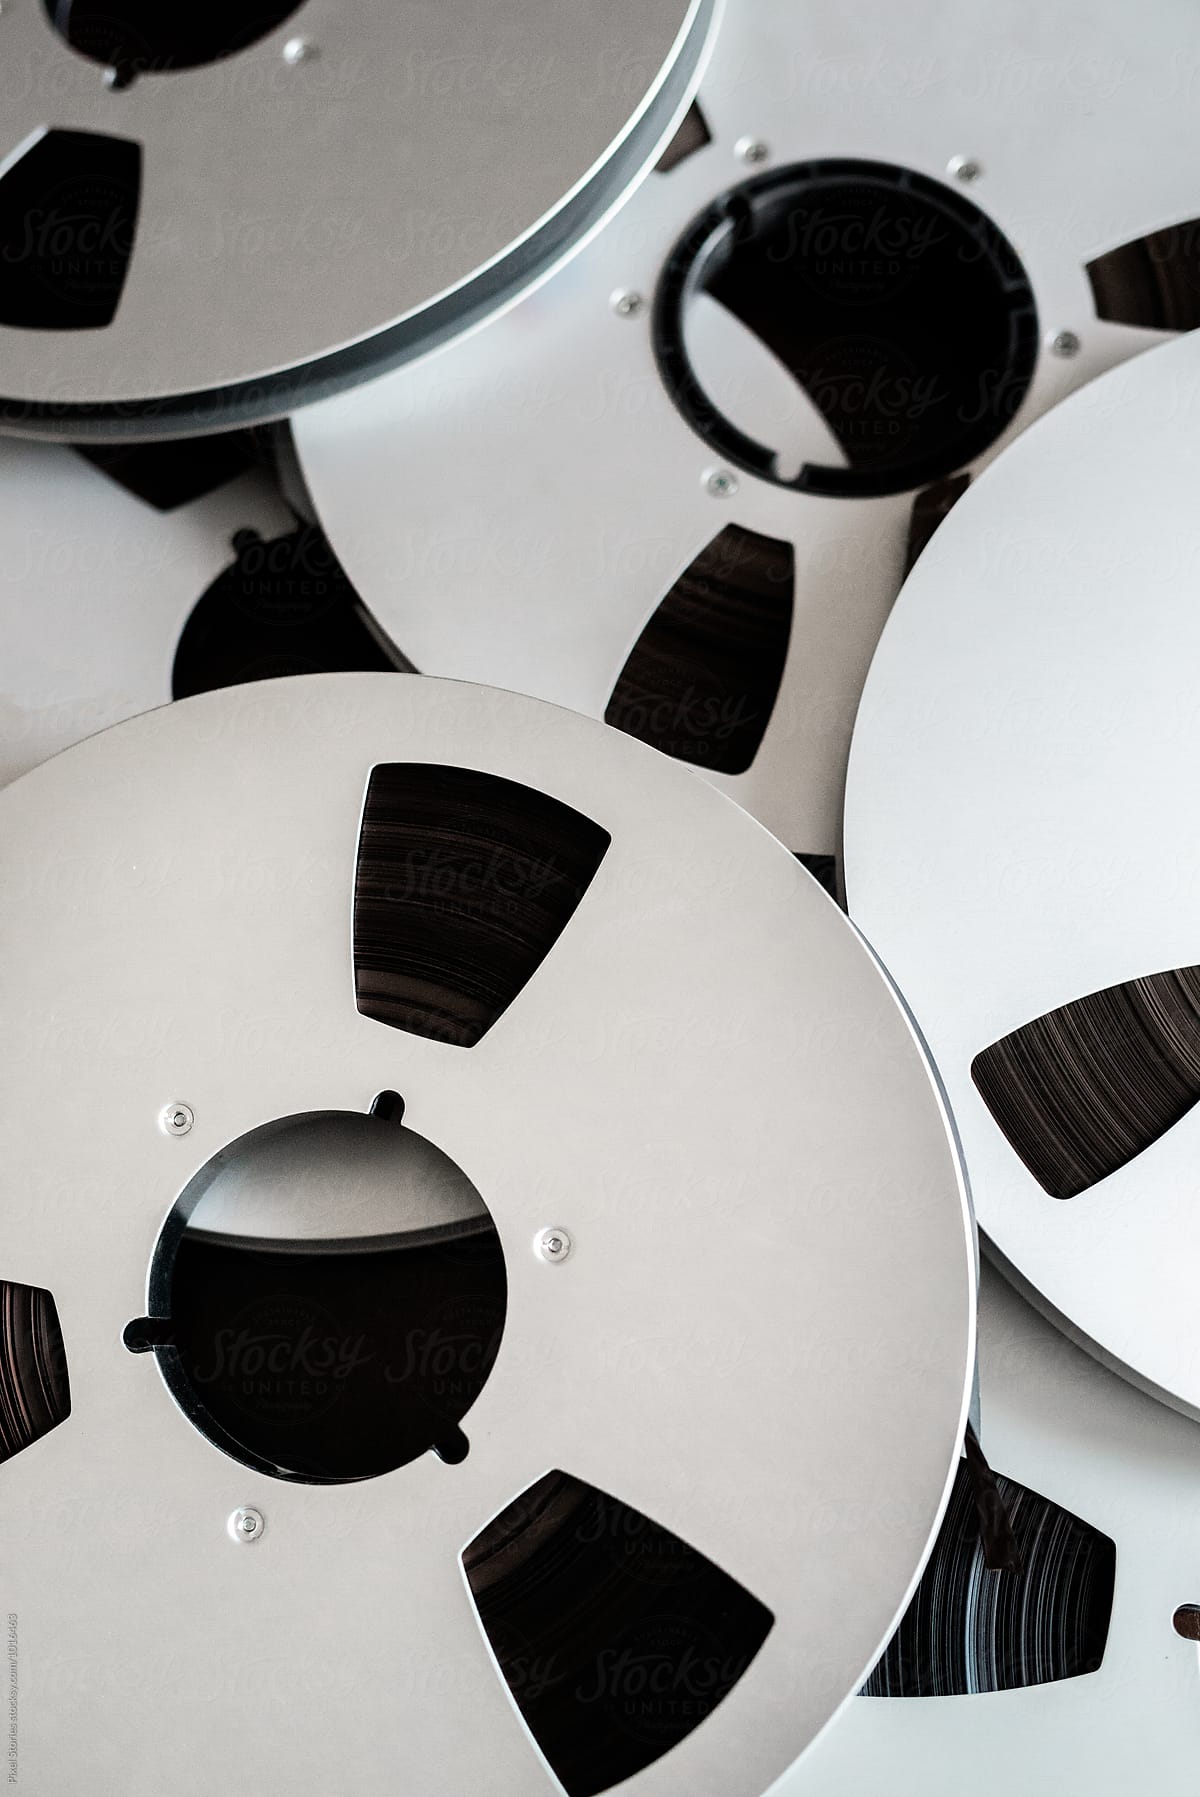 Reel Of Magnetic Tape Music Concept Background by Stocksy Contributor  Pixel Stories - Stocksy